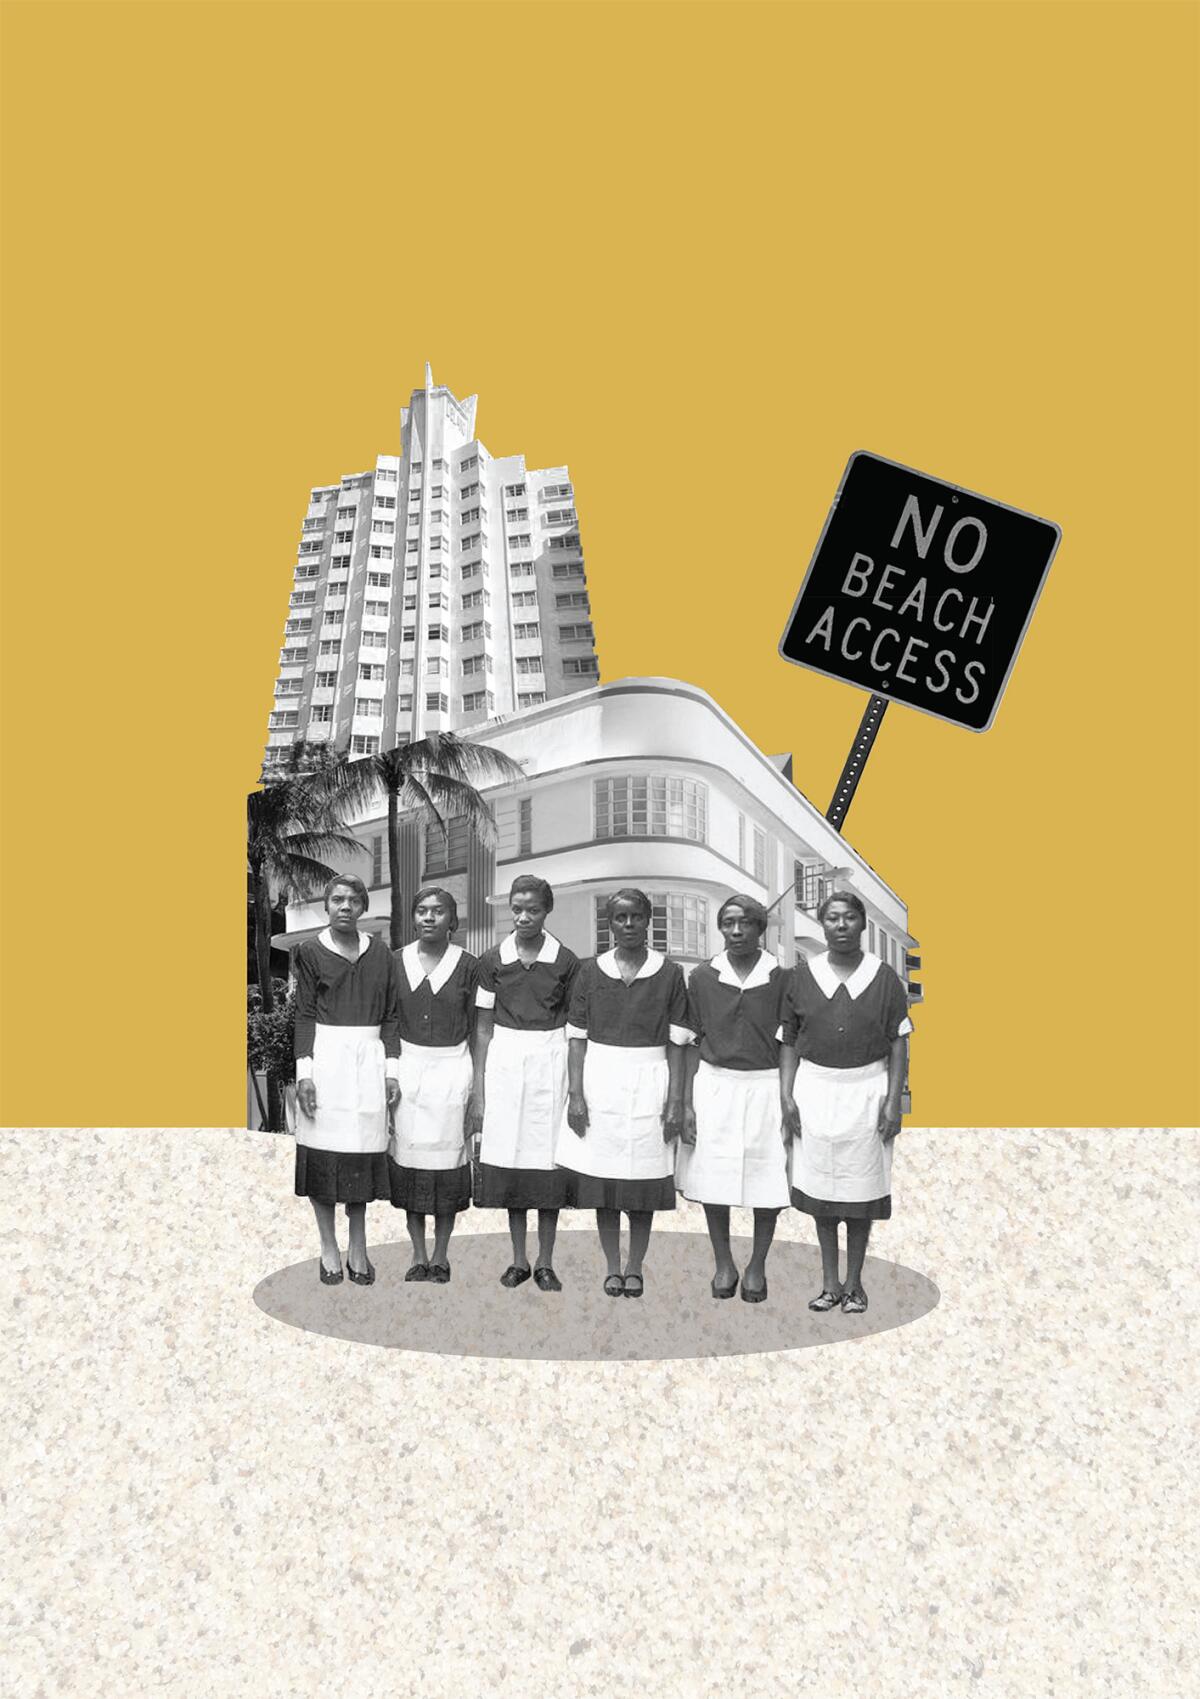 A vintage image of Black domestic workers is juxtaposed alongside a Modernist tower and a sign reading "No Beach Access"